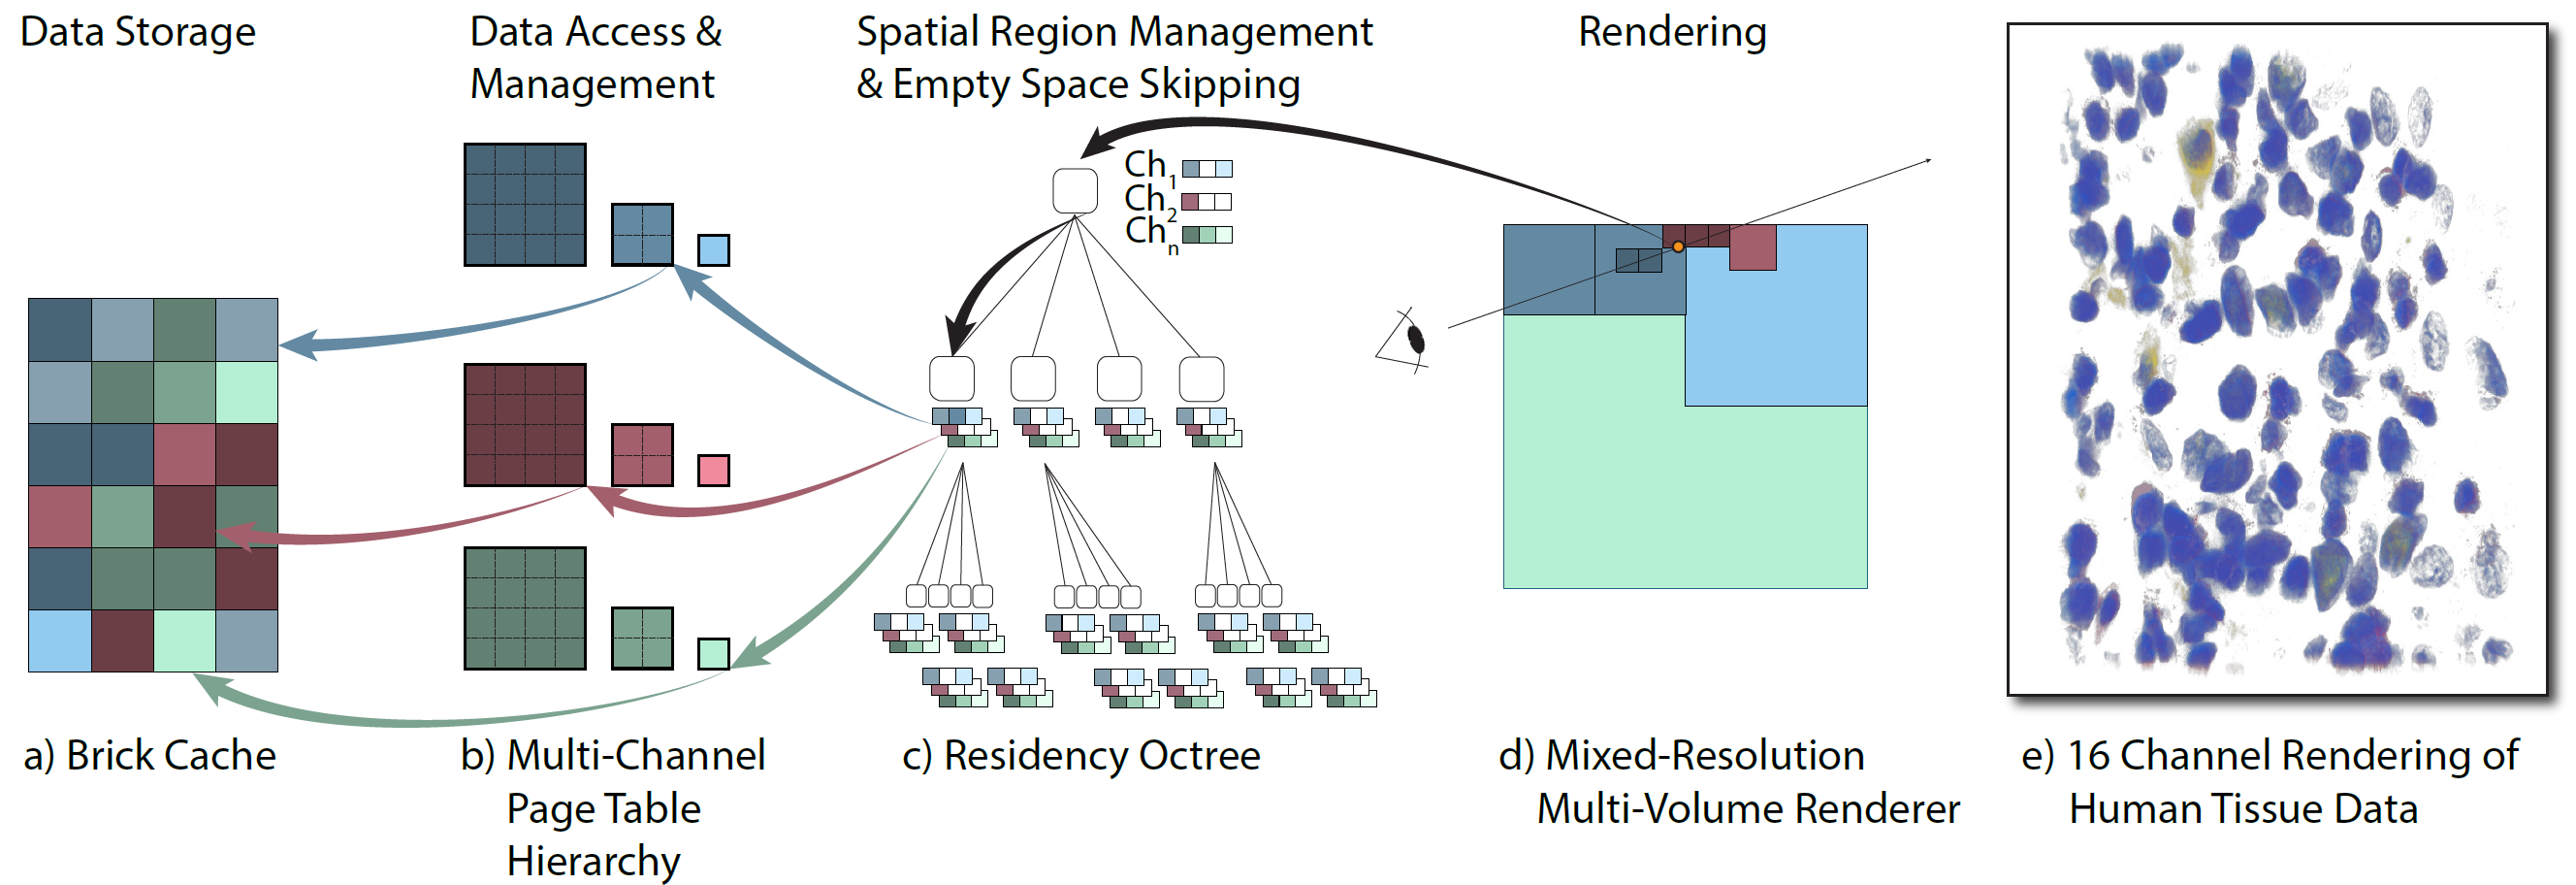 Residency Octree: A Hybrid Approach for Scalable Web-Based Multi-Volume Rendering
